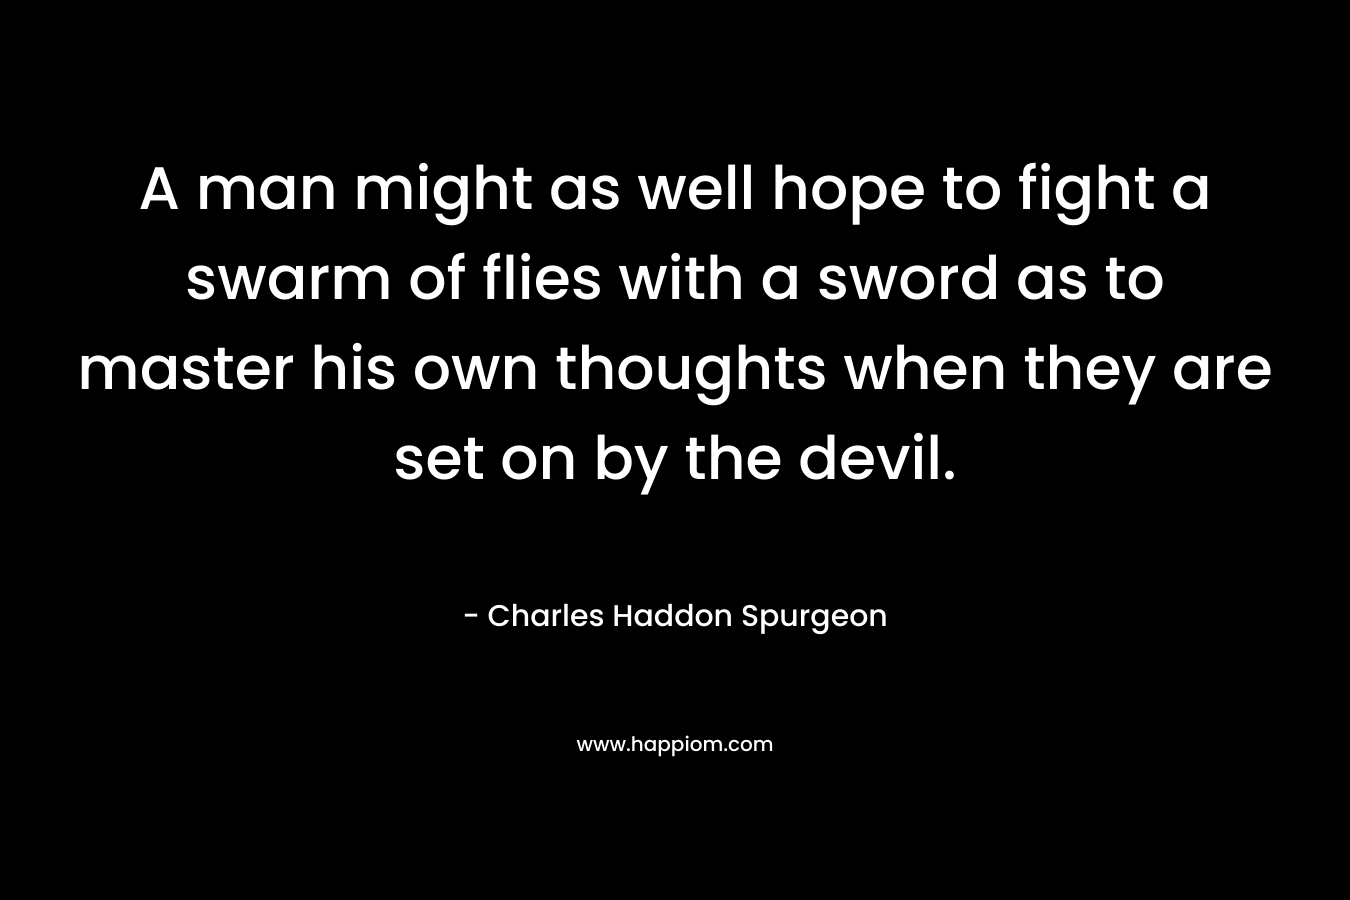 A man might as well hope to fight a swarm of flies with a sword as to master his own thoughts when they are set on by the devil. – Charles Haddon Spurgeon